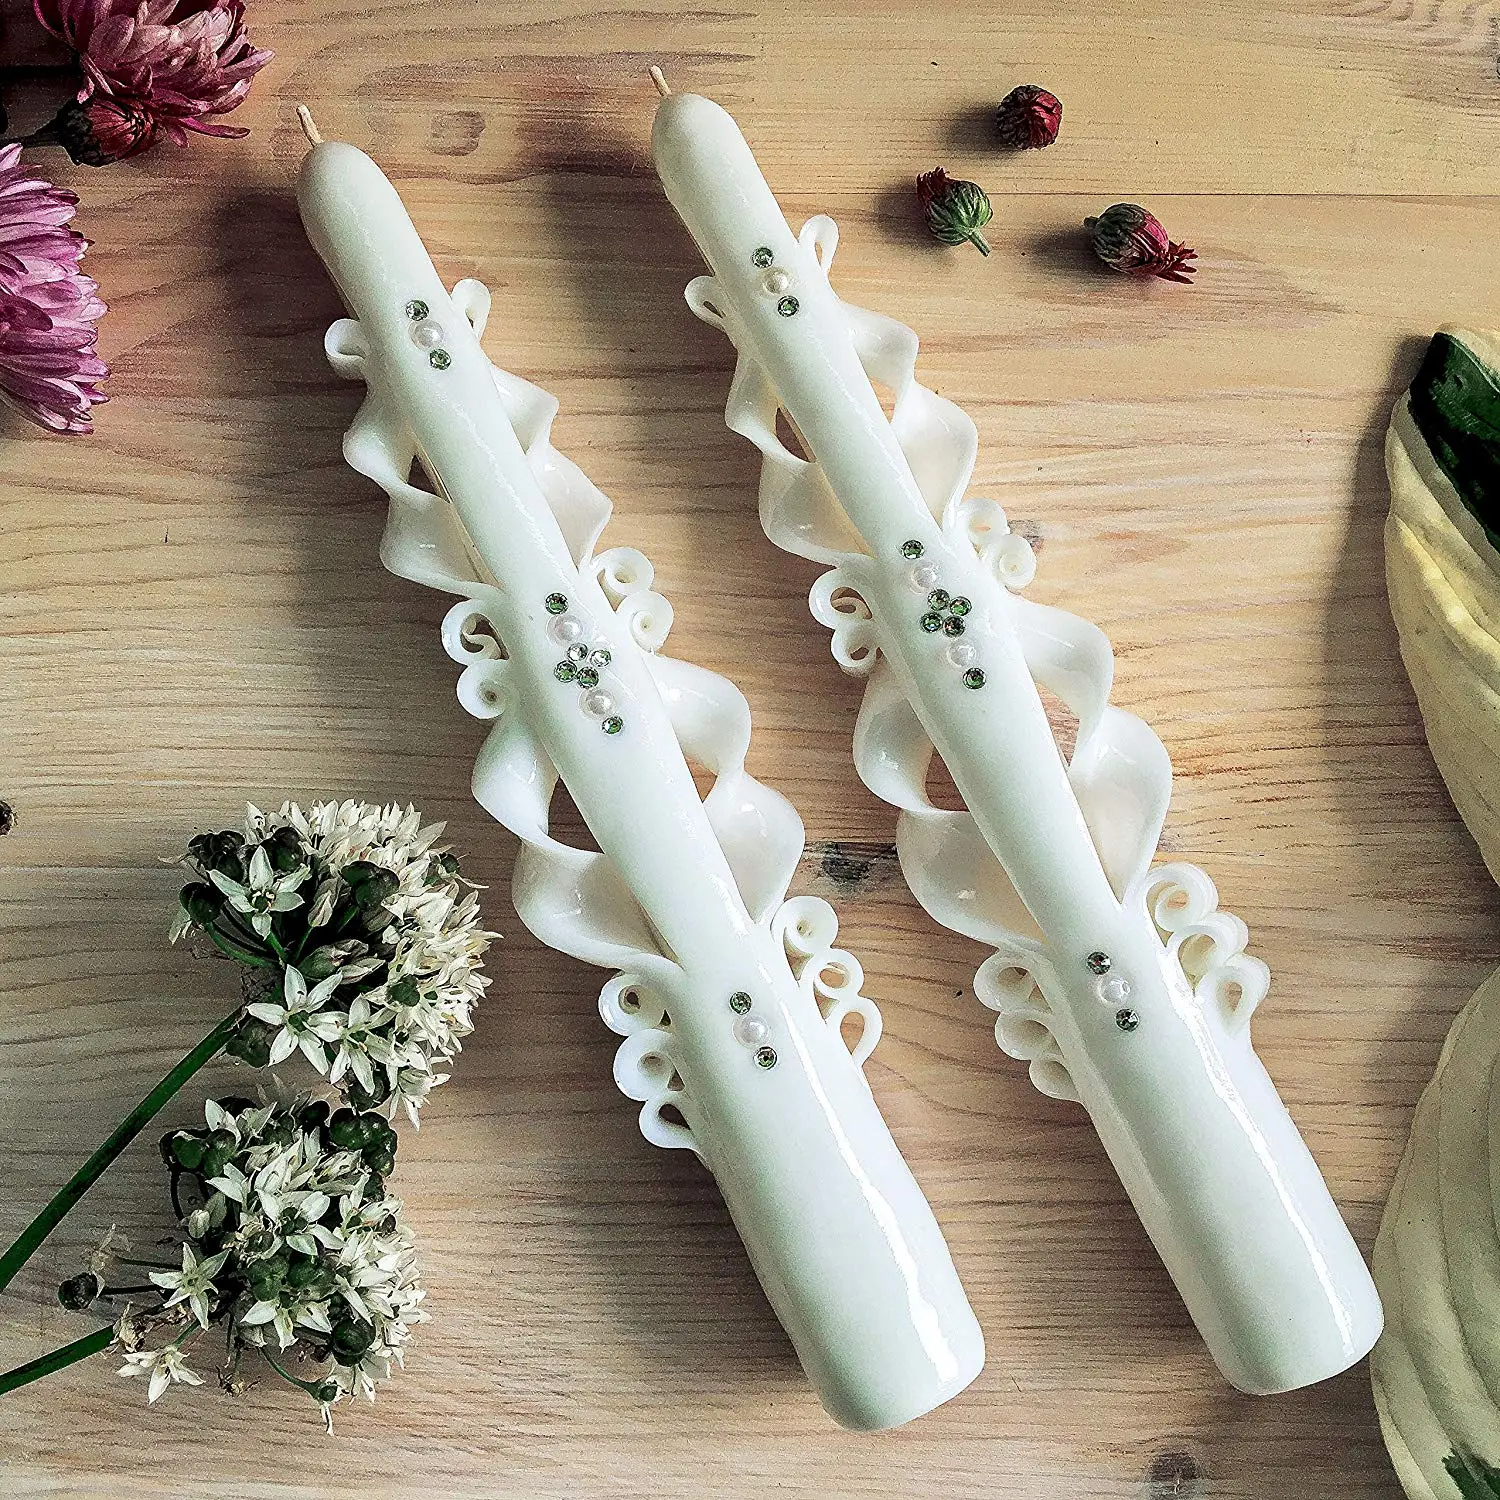 Cheap Wedding Candles Uk Find Wedding Candles Uk Deals On Line At